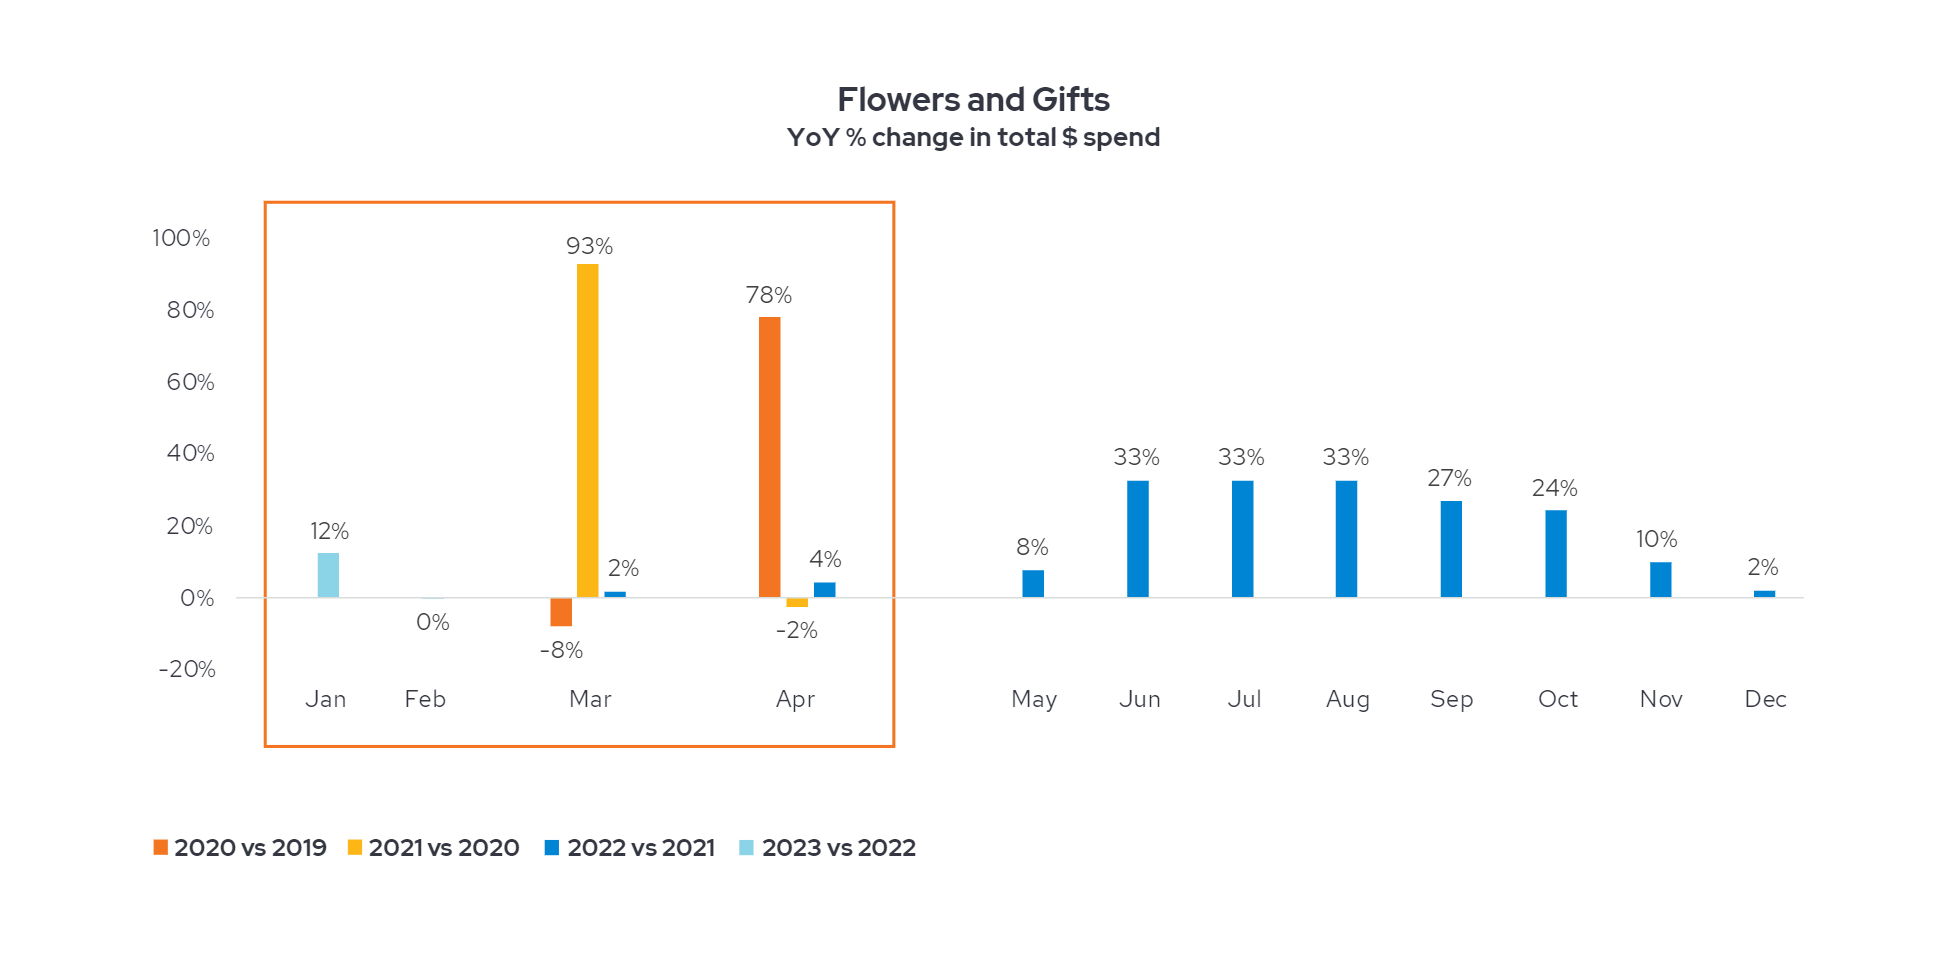 Flowers and Gifts spending